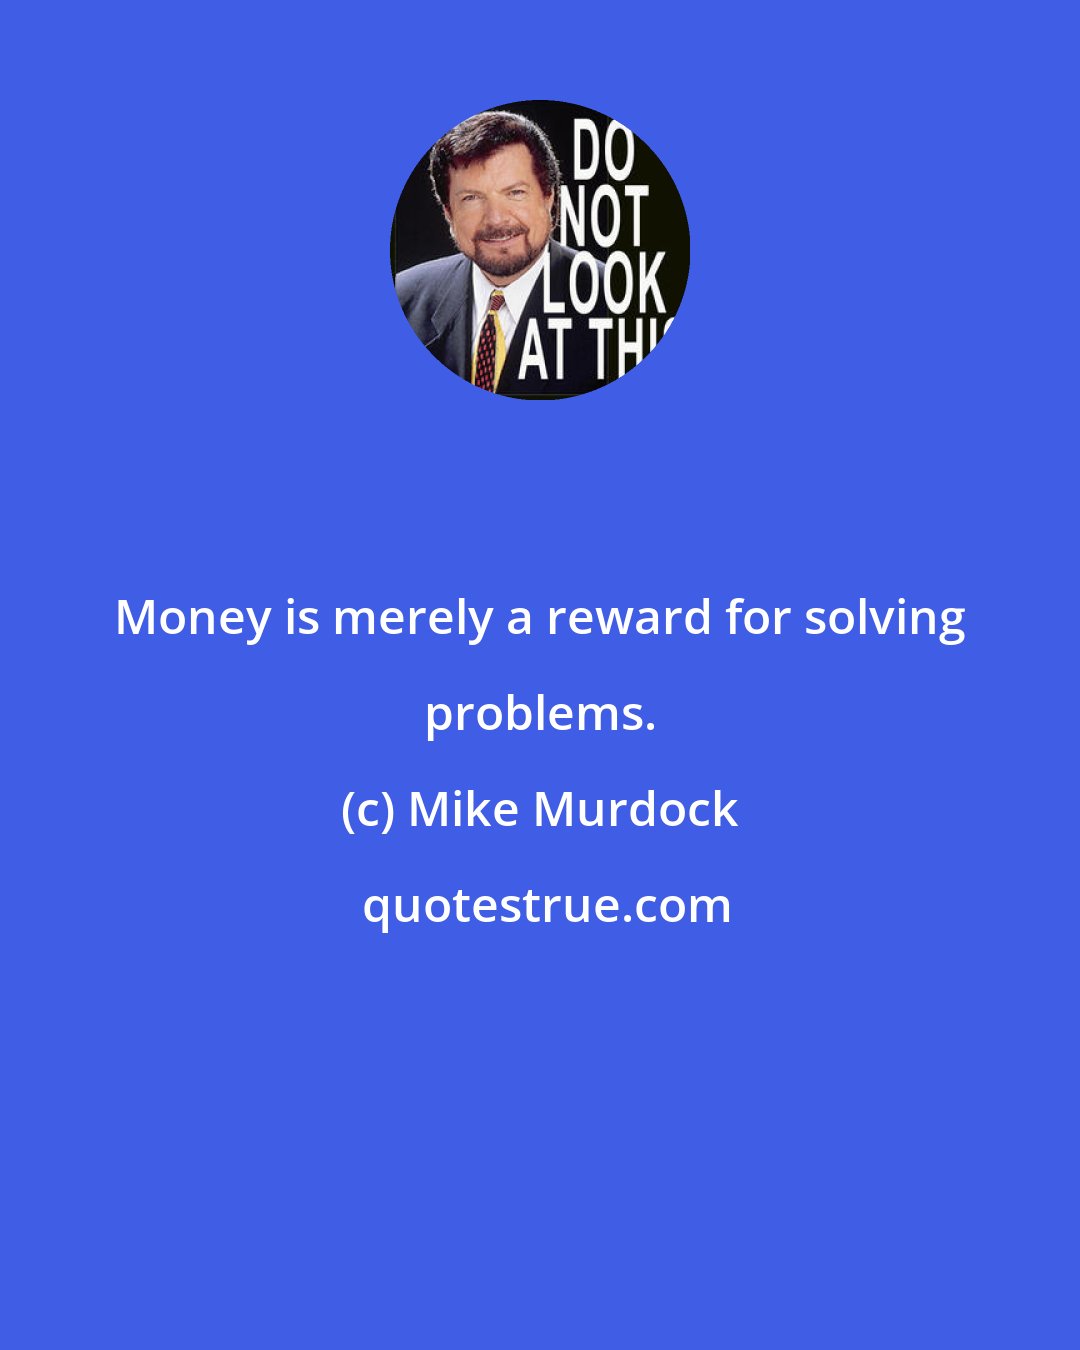 Mike Murdock: Money is merely a reward for solving problems.